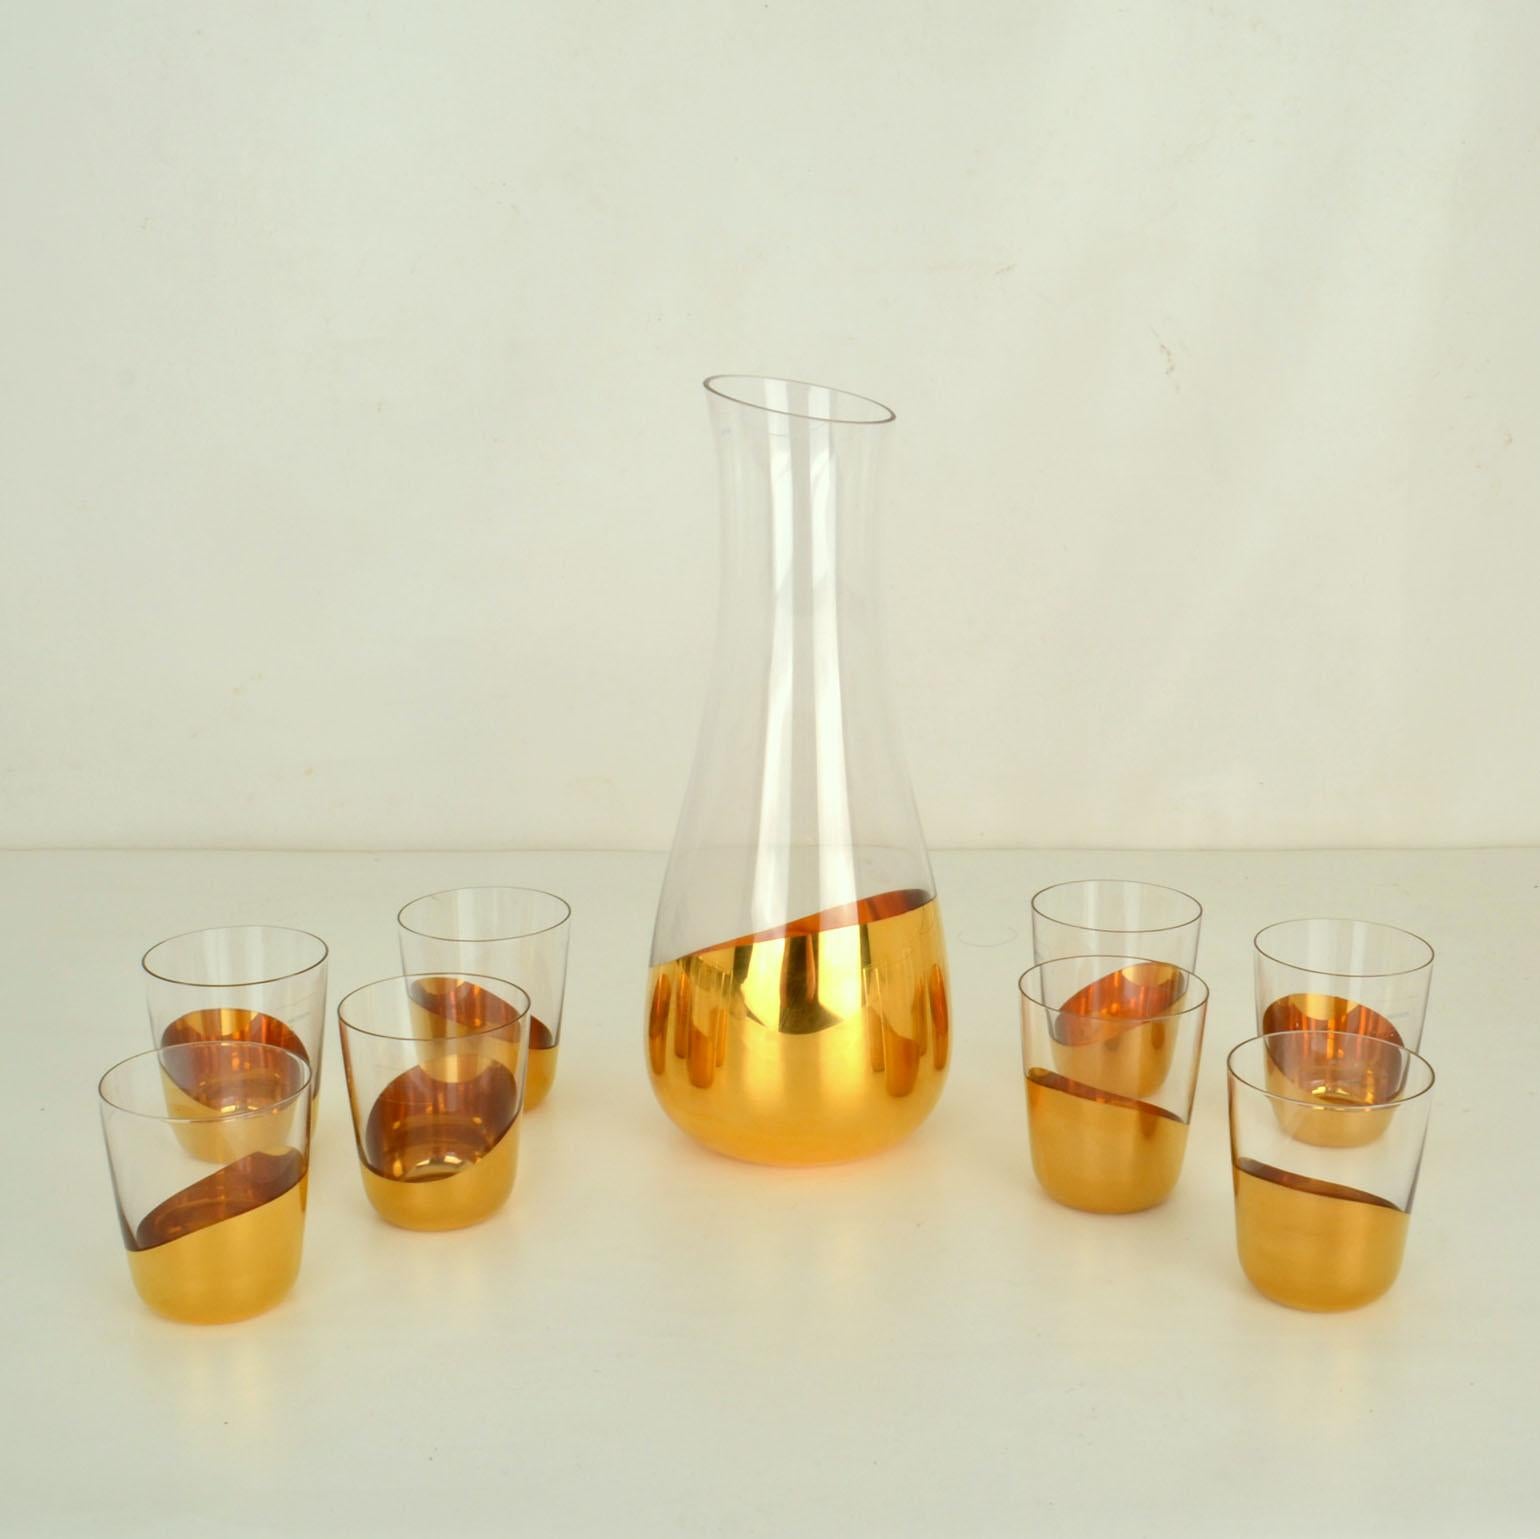 Two blown glass carafes and ten water glasses dipped in gold by Front for Skitch, Italy 2010.
The glasses and carafes set Midas proposes a contemporary and ironic version of luxury glass ware. Dipped in gold bath creates a random image, almost